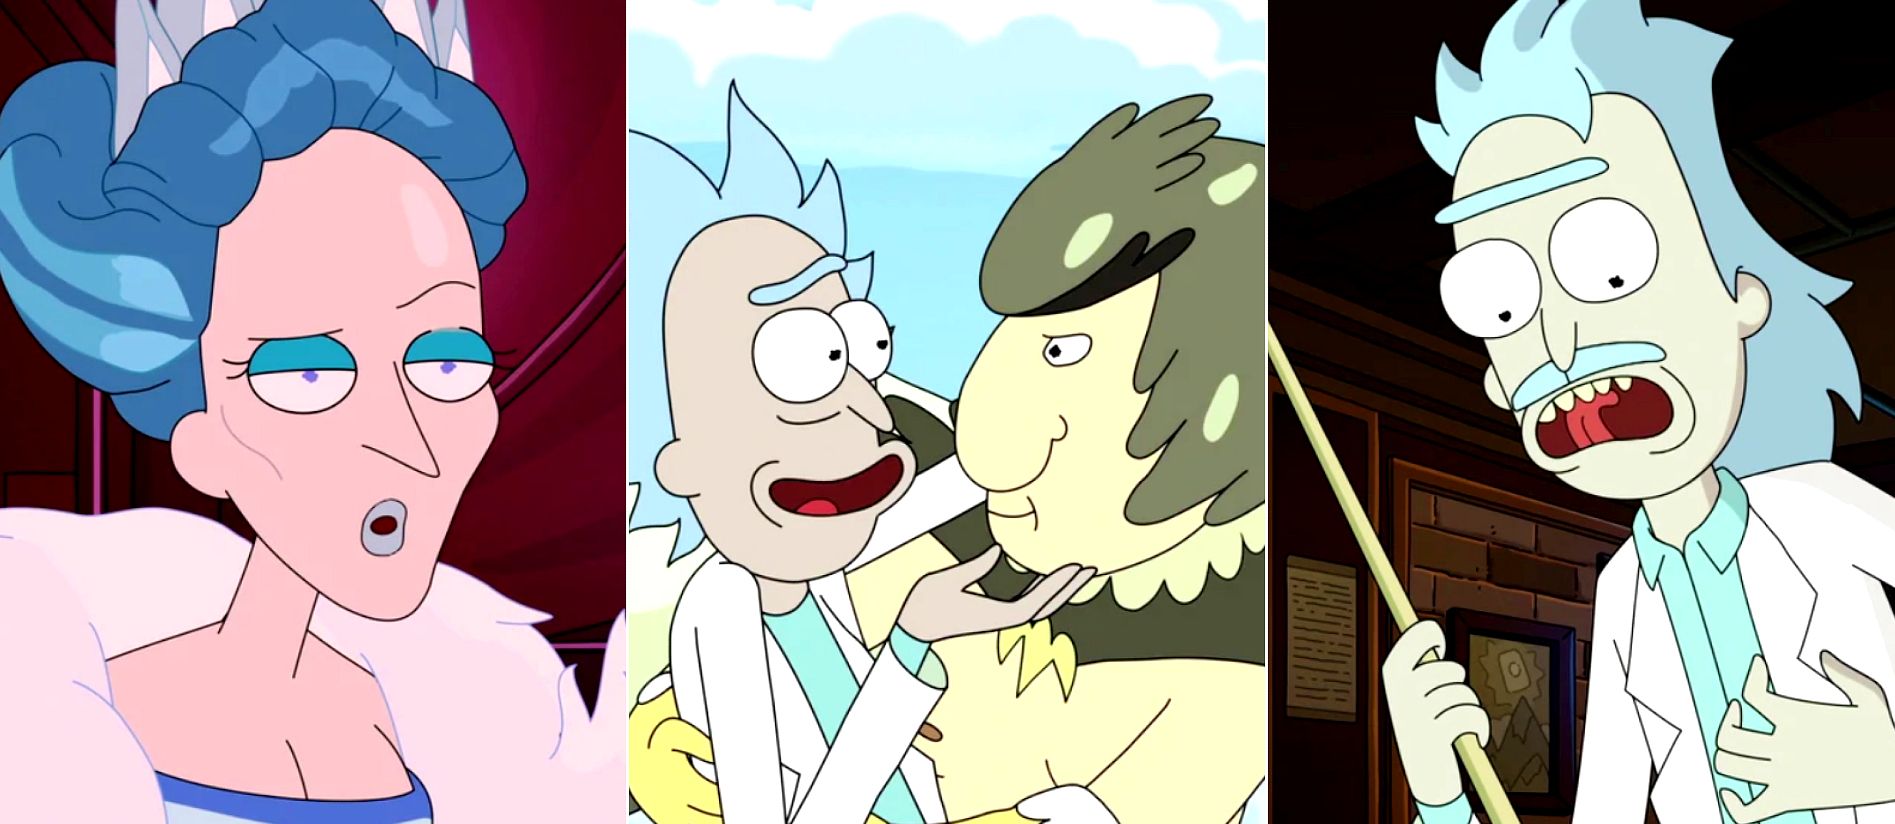 There are 30+ easter eggs in Rick and Morty Season 4, Episode 6